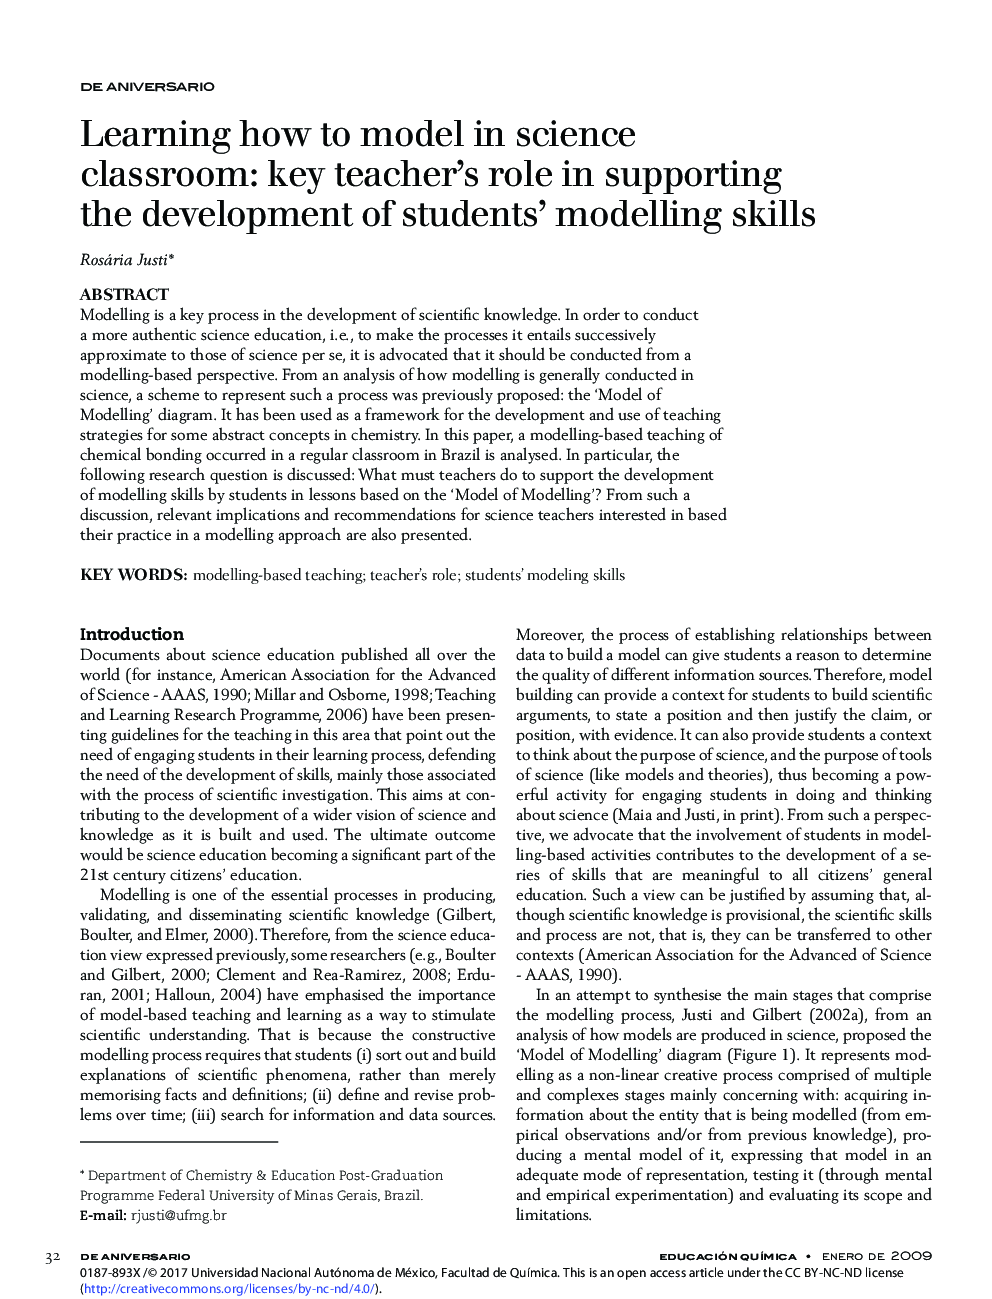 Learning how to model in science classroom: key teacher's role in supporting the development of students' modelling skills